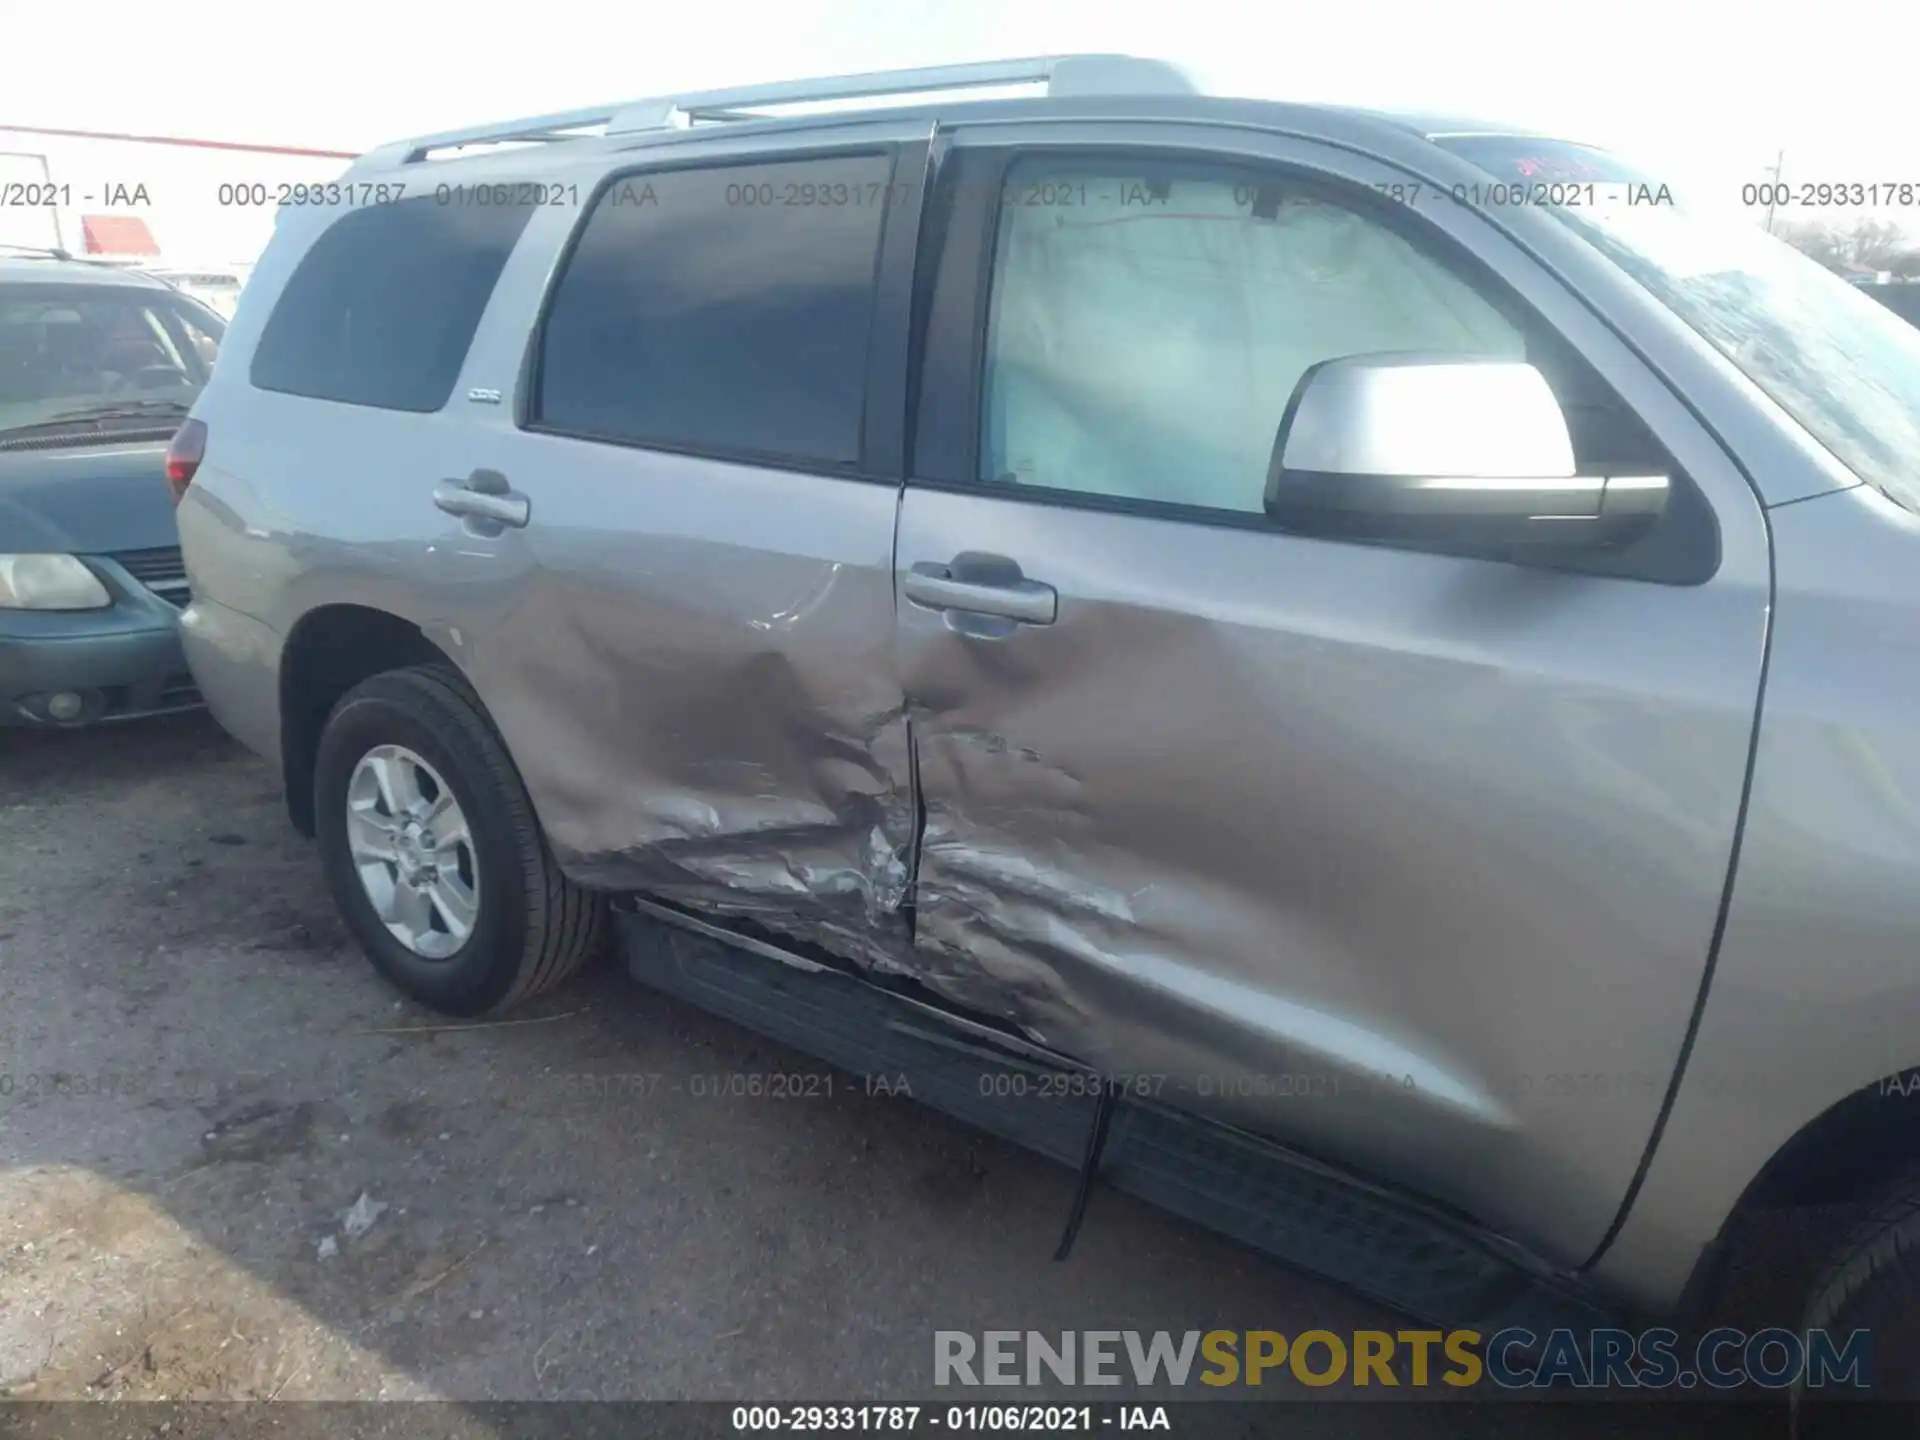 6 Photograph of a damaged car 5TDBY5G19KS166580 TOYOTA SEQUOIA 2019